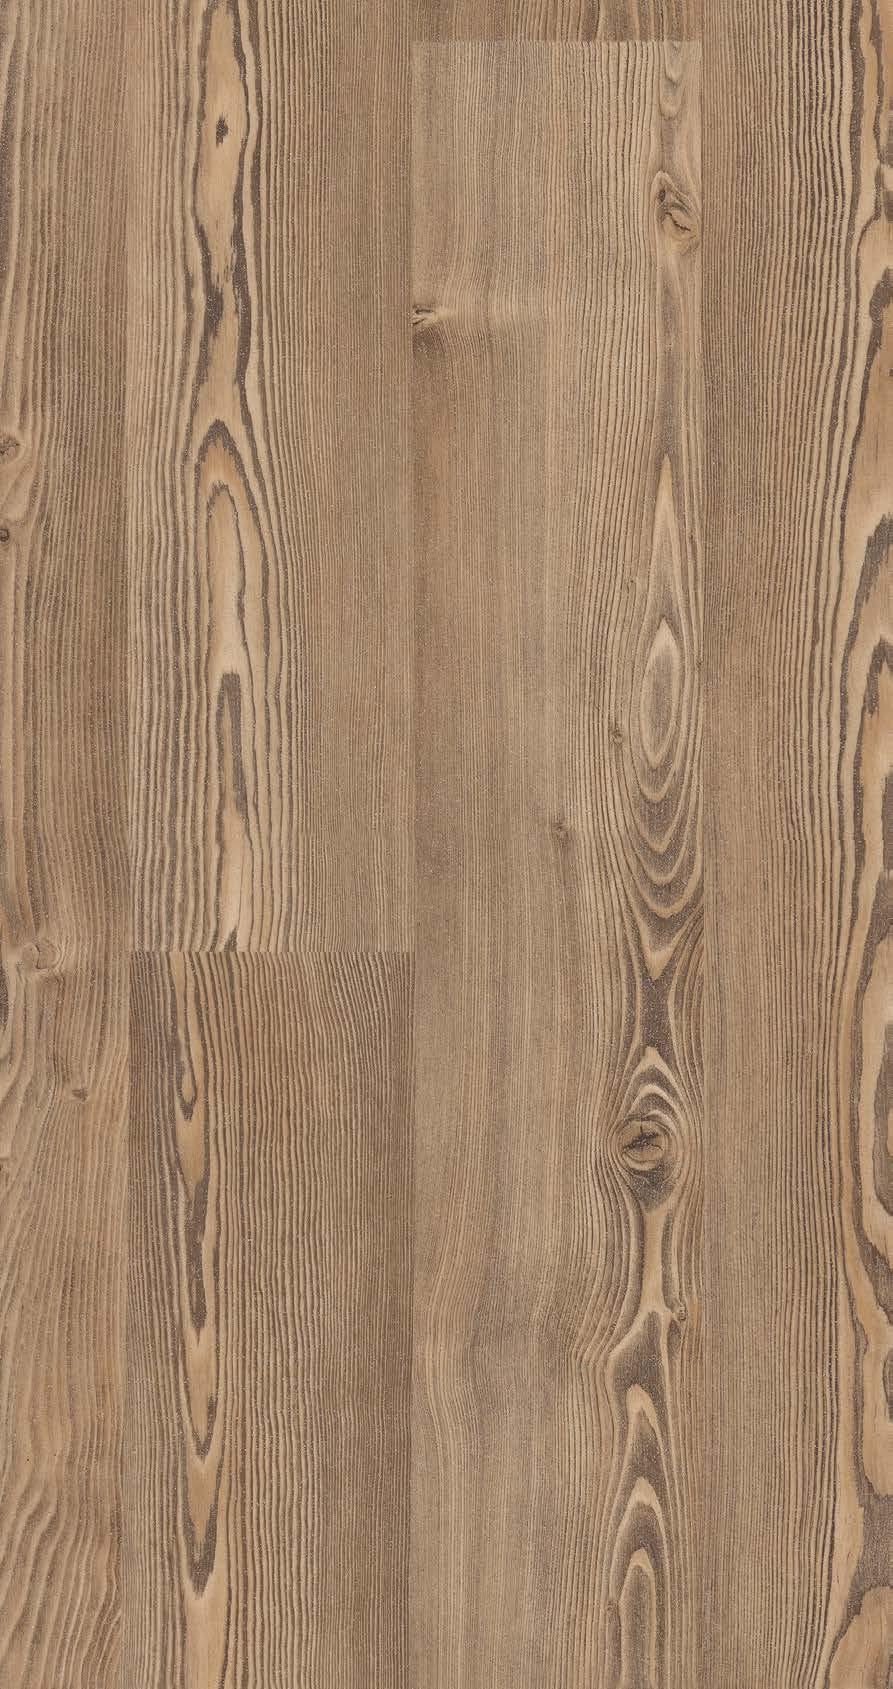 12 TROPICAL PINE 3376 Plank size on sheet: 166mm (W) x 1500mm (L)